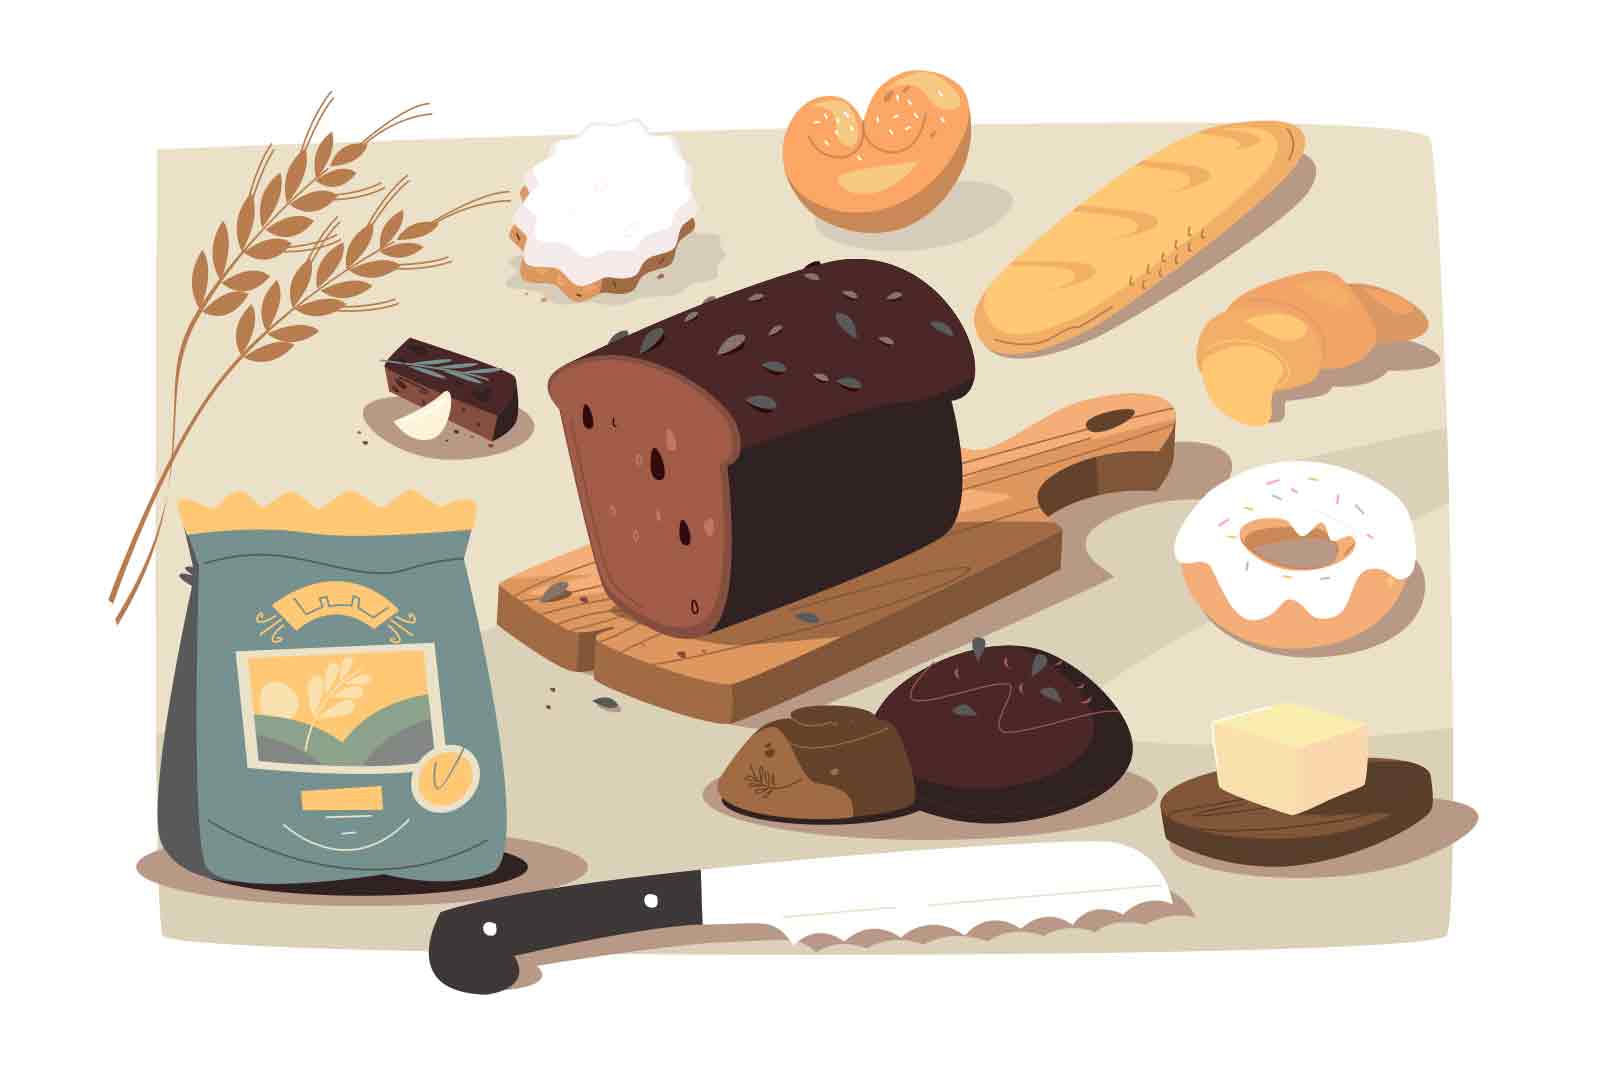 Baking and flour products set of objects vector illustration. Bread, rolls and ingredients lying on the table.